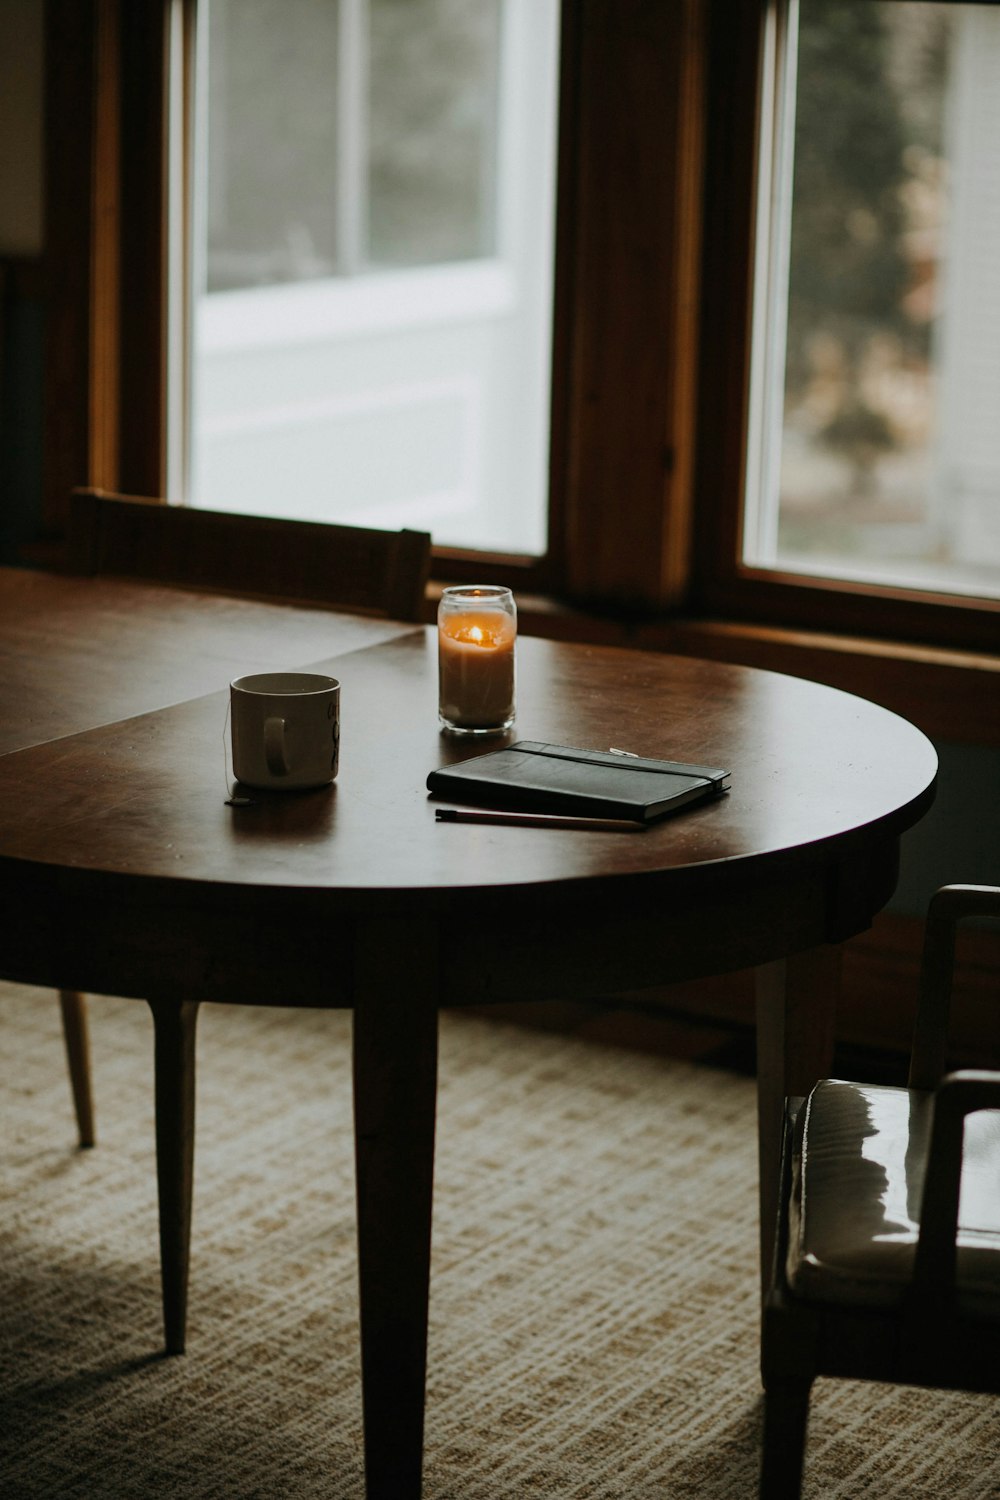 a candle sits on a table in front of a window